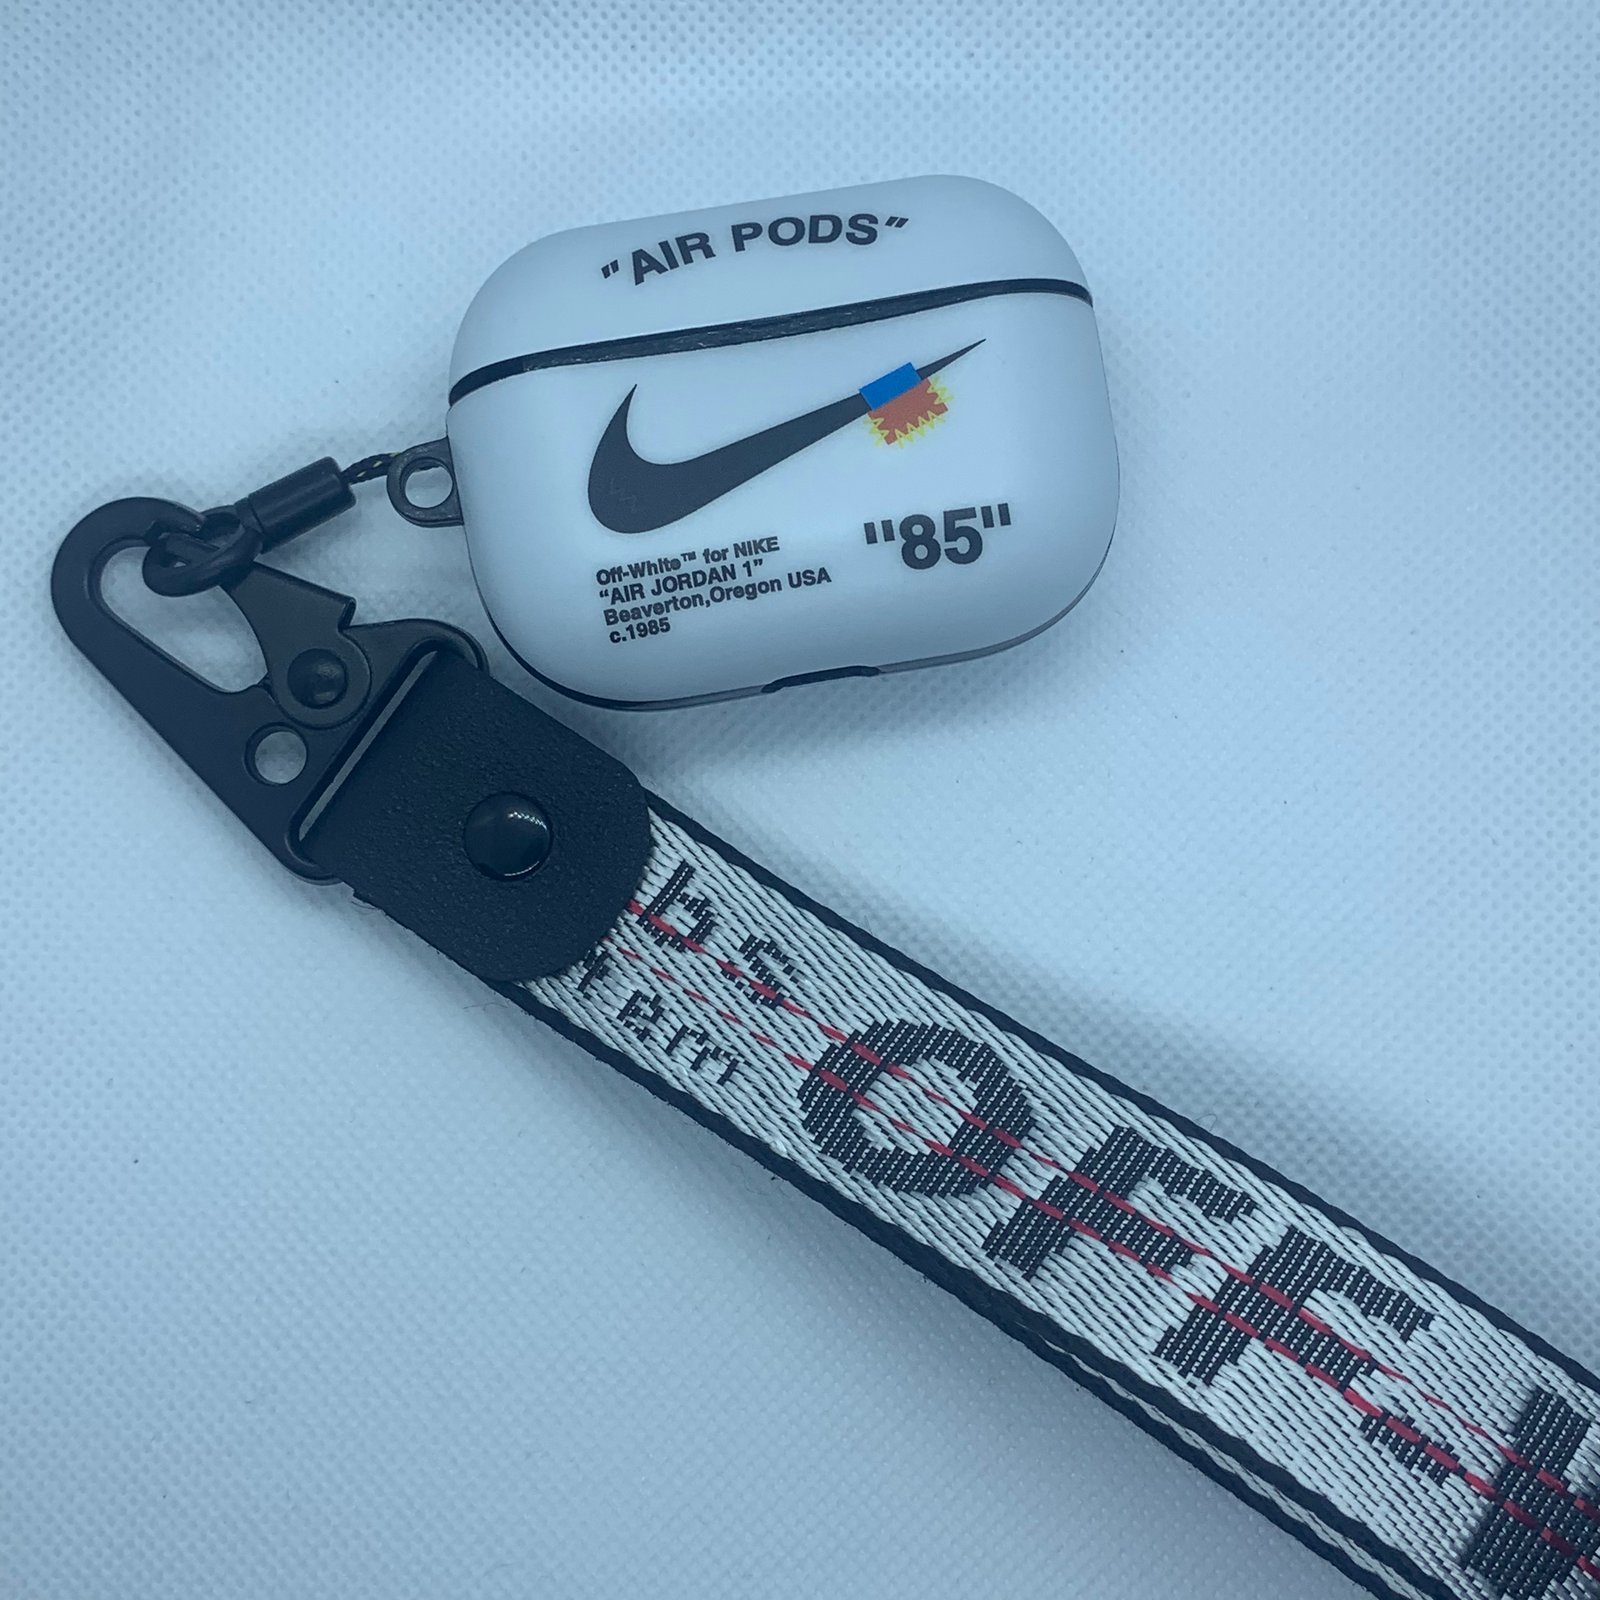 off white airpod pro case with lanyard